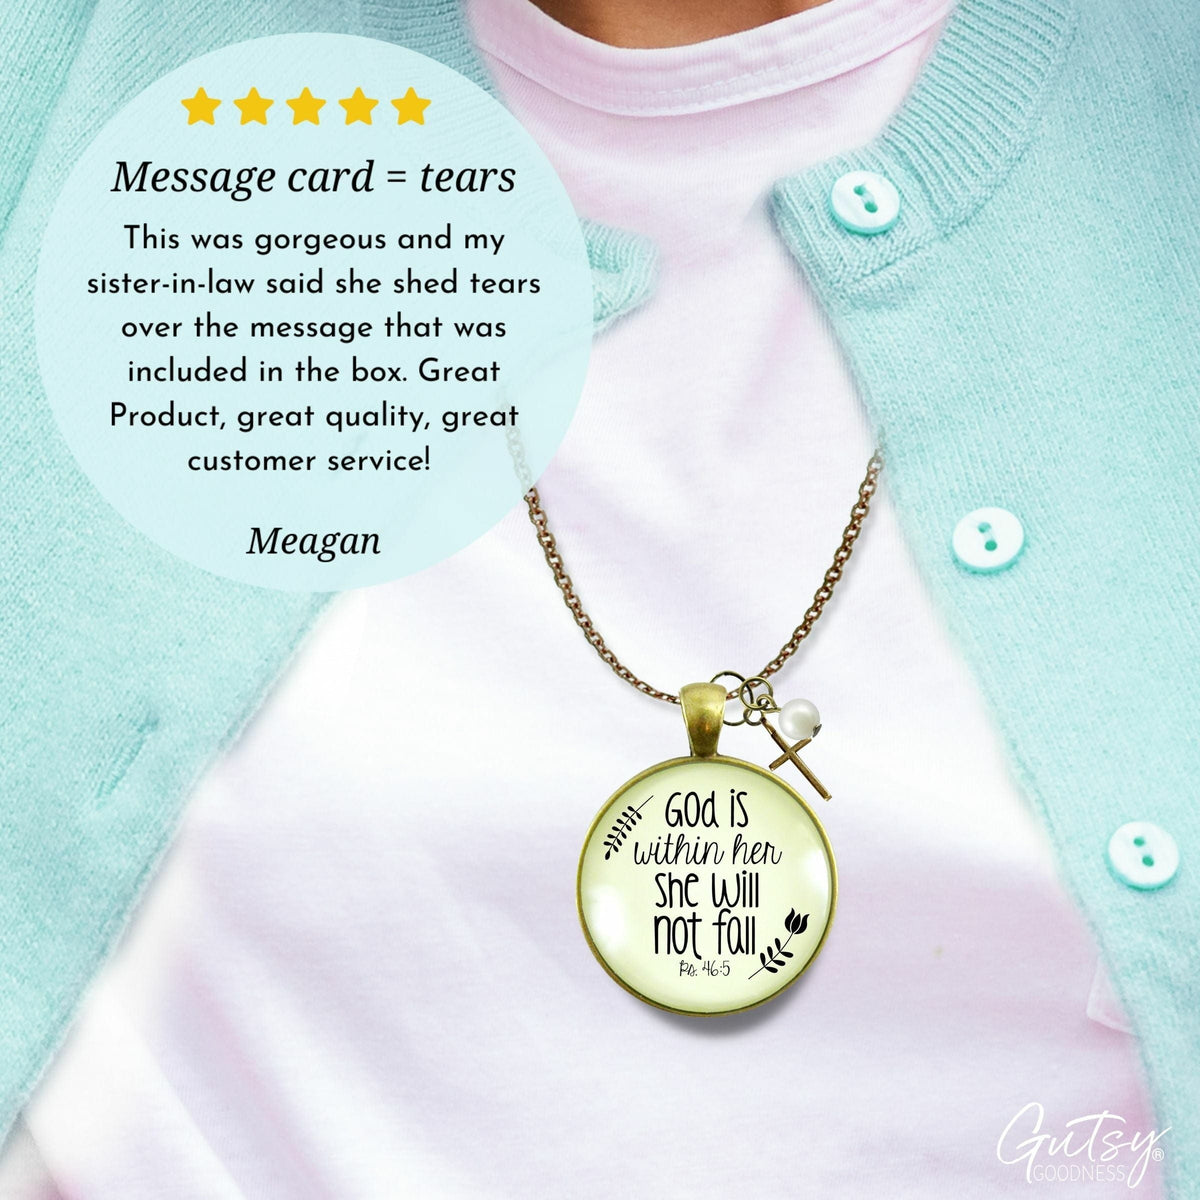 Gutsy Goodness God is Within Her Necklace Meaningful Psalm Quote Jewelry Faith Charm - Gutsy Goodness Handmade Jewelry;God Is Within Her Necklace Meaningful Psalm Quote Jewelry Faith Charm - Gutsy Goodness Handmade Jewelry Gifts